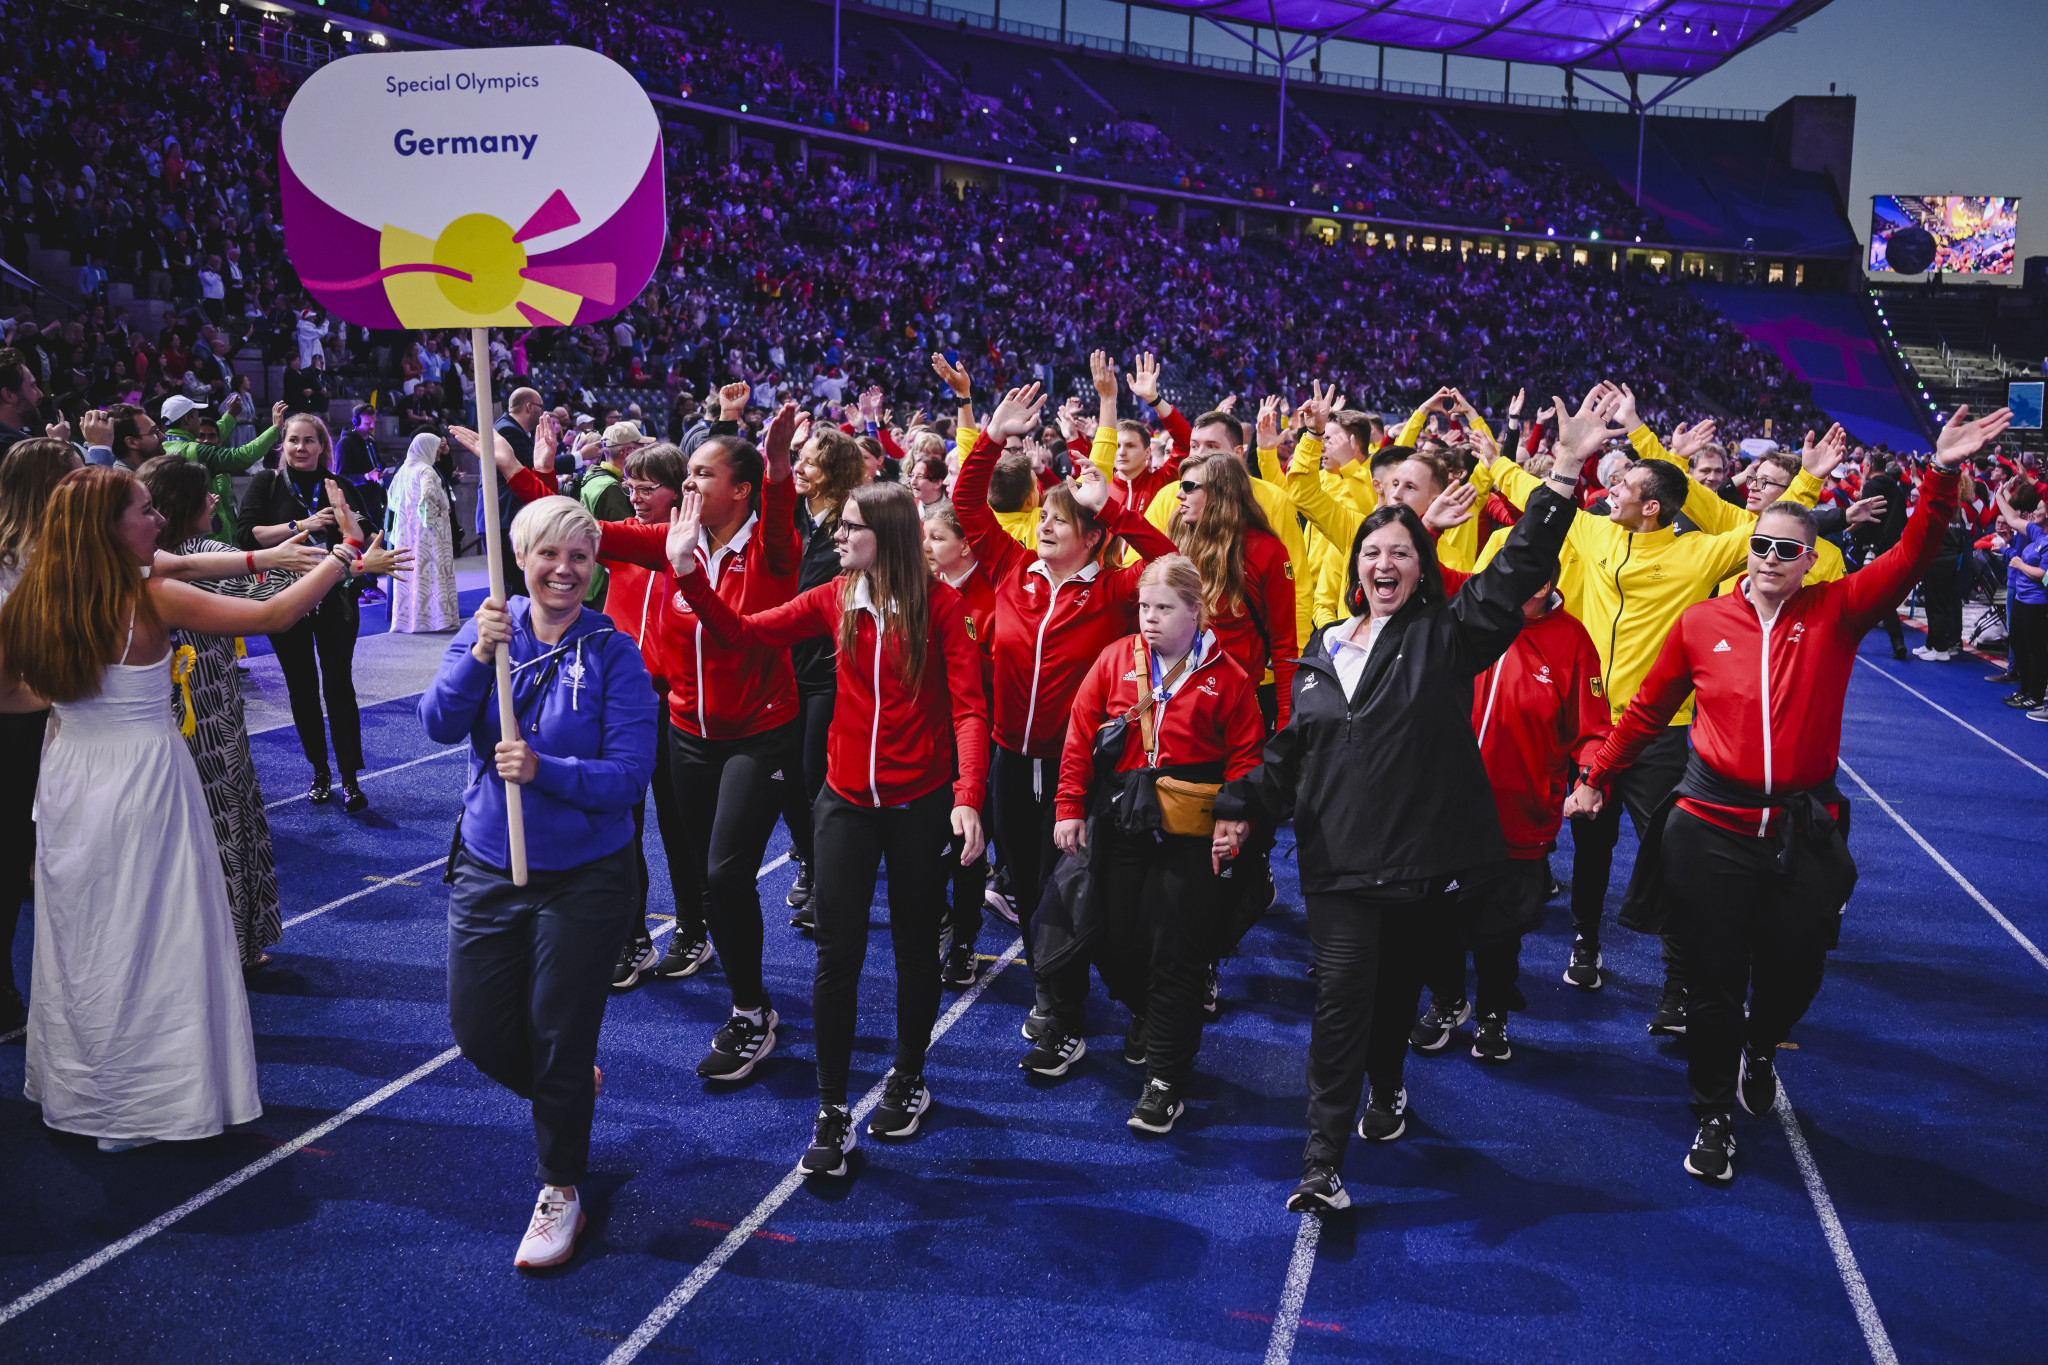 Ukraine receive huge ovation at Special Olympics World Games Parade of